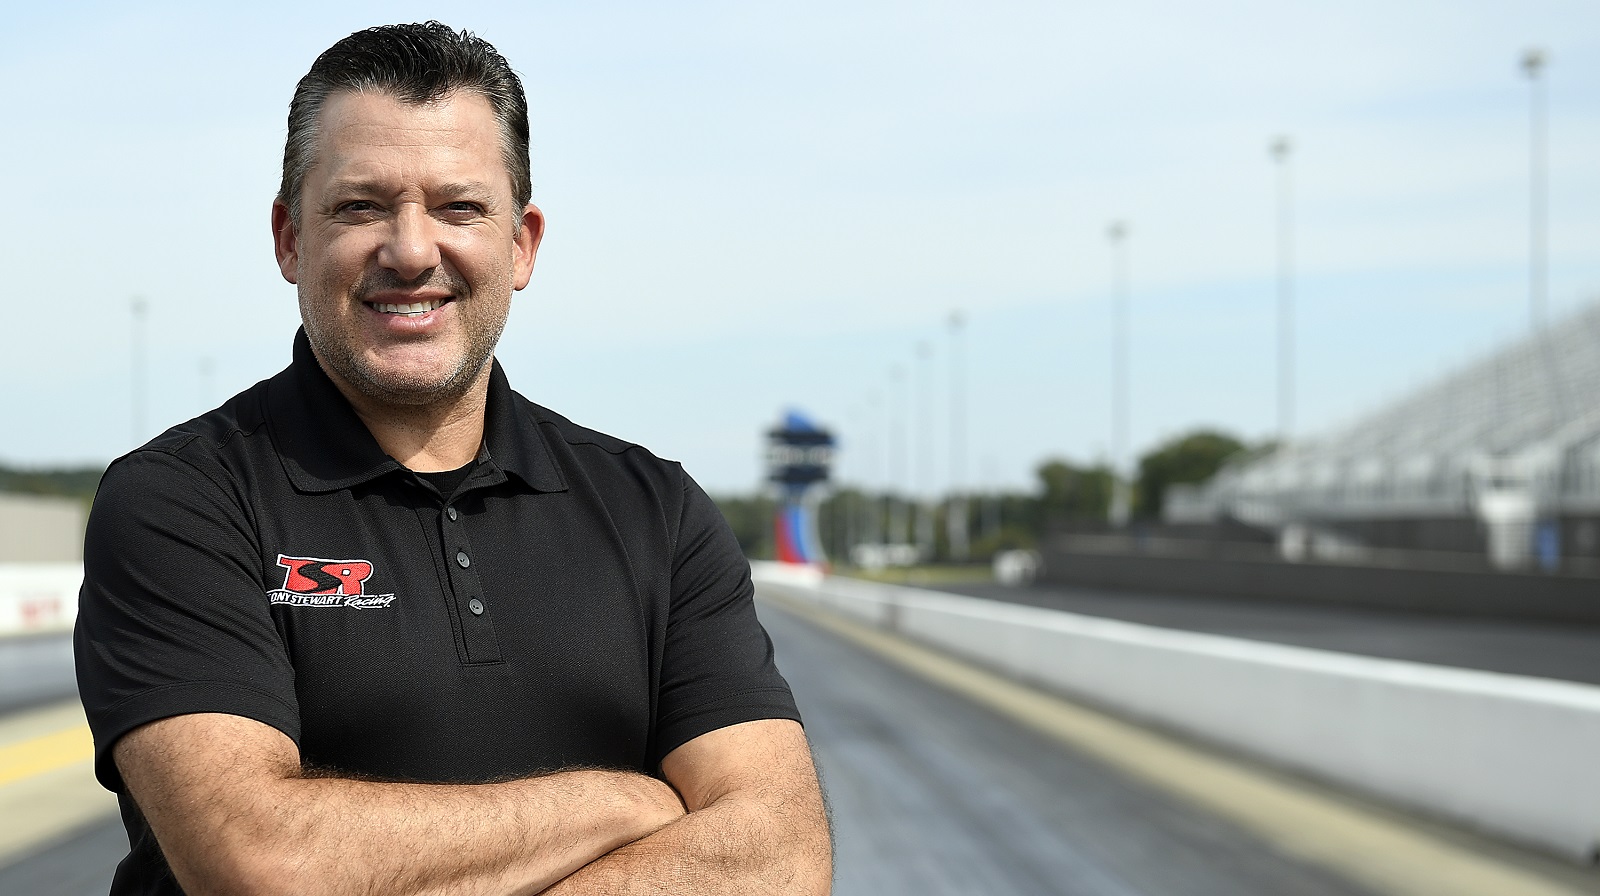 Tony Stewart poses for a portrait at the zMAX Dragway on Oct. 14, 2021, in Concord, North Carolina.